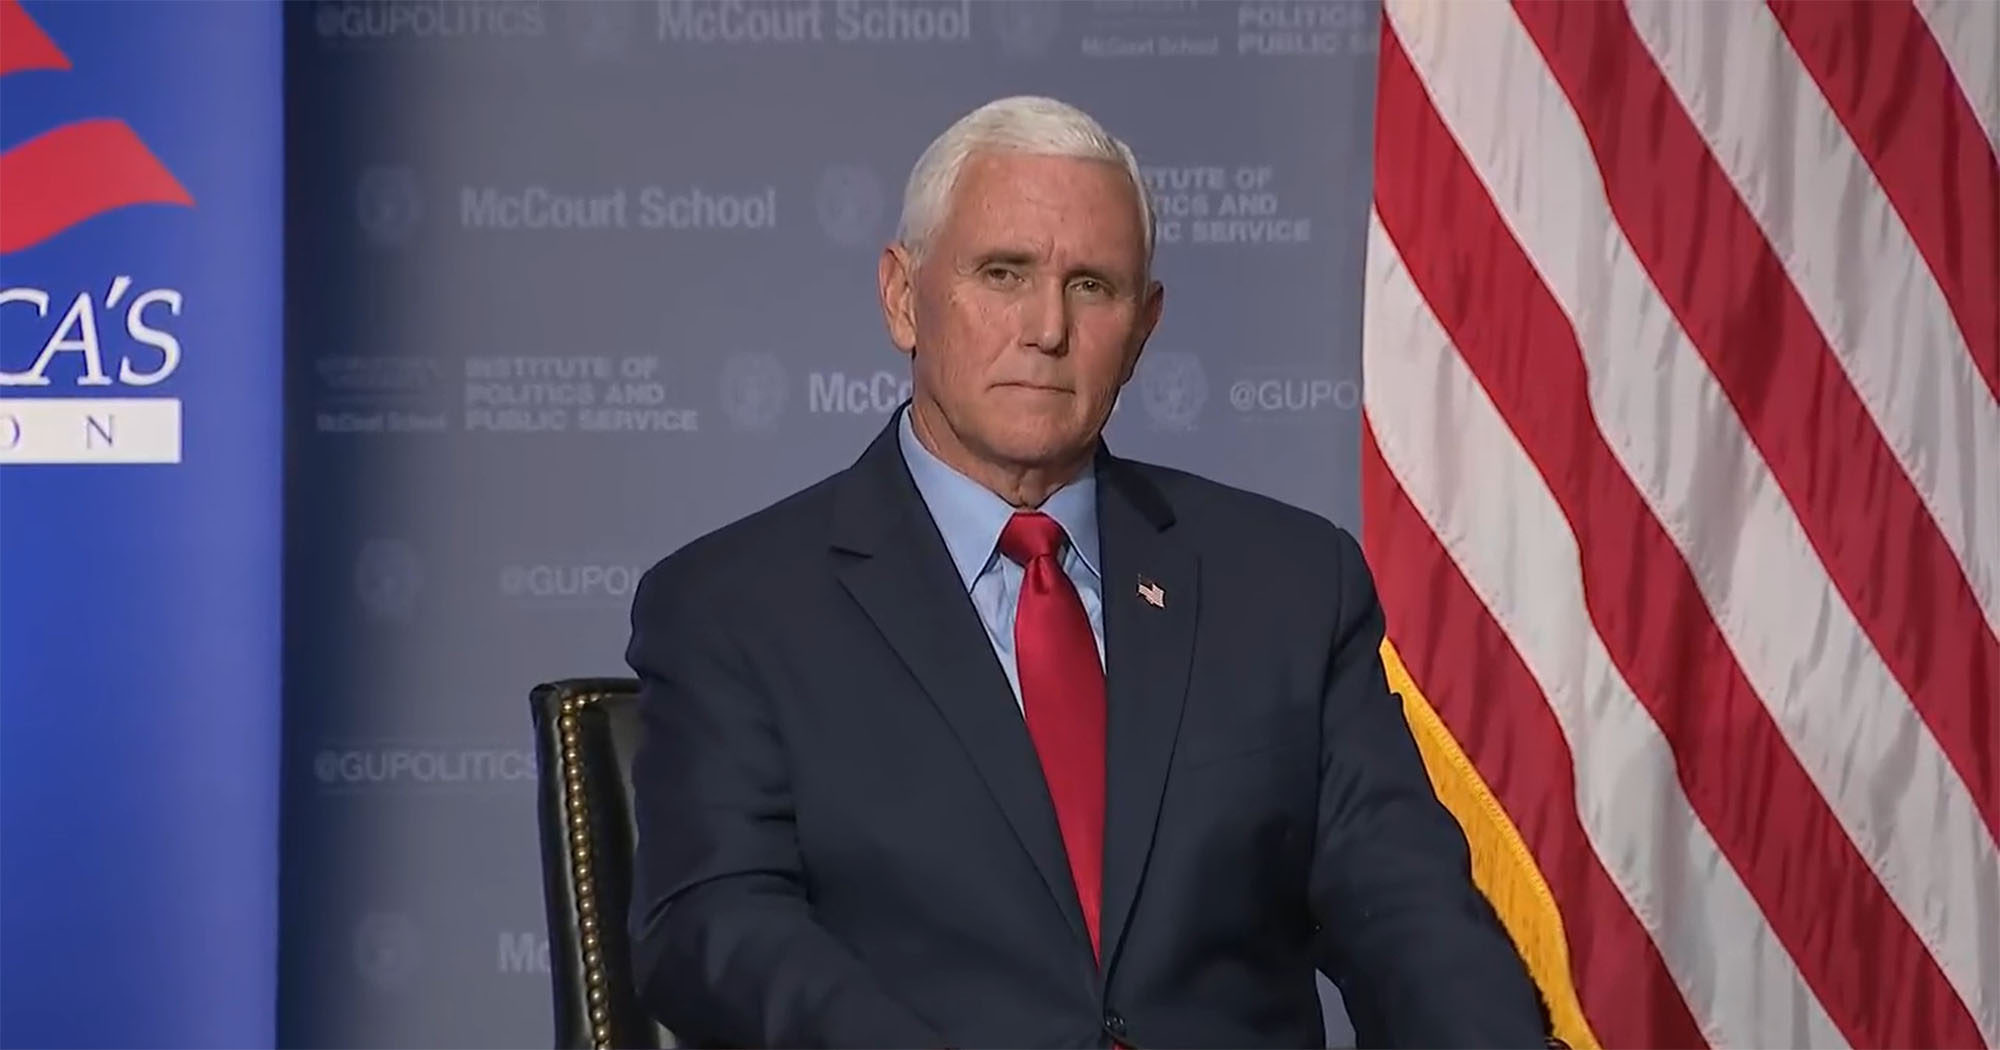 PHOTO: Former Vice President Mike Pence speaks at McCourt School of Public Policy at Georgetown, Oct. 19, 2022.